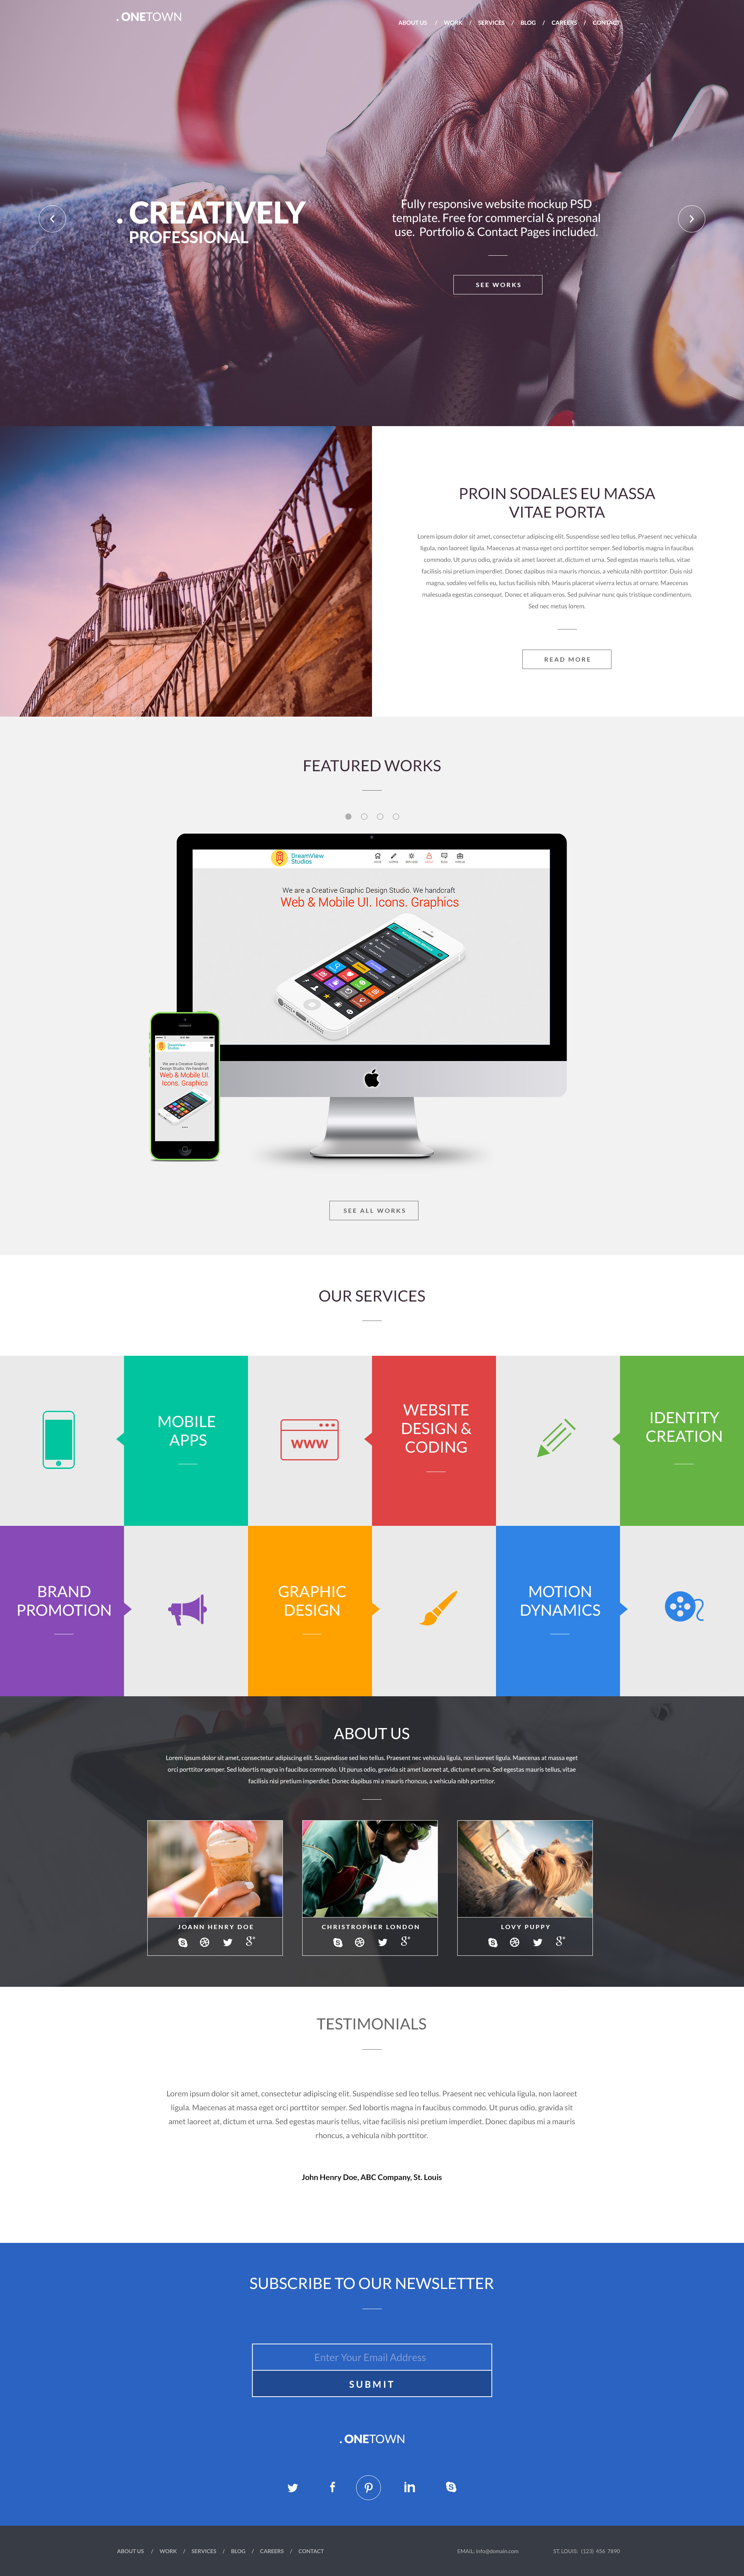 Free Responsive Website PSD Templates - GraphicsFuel